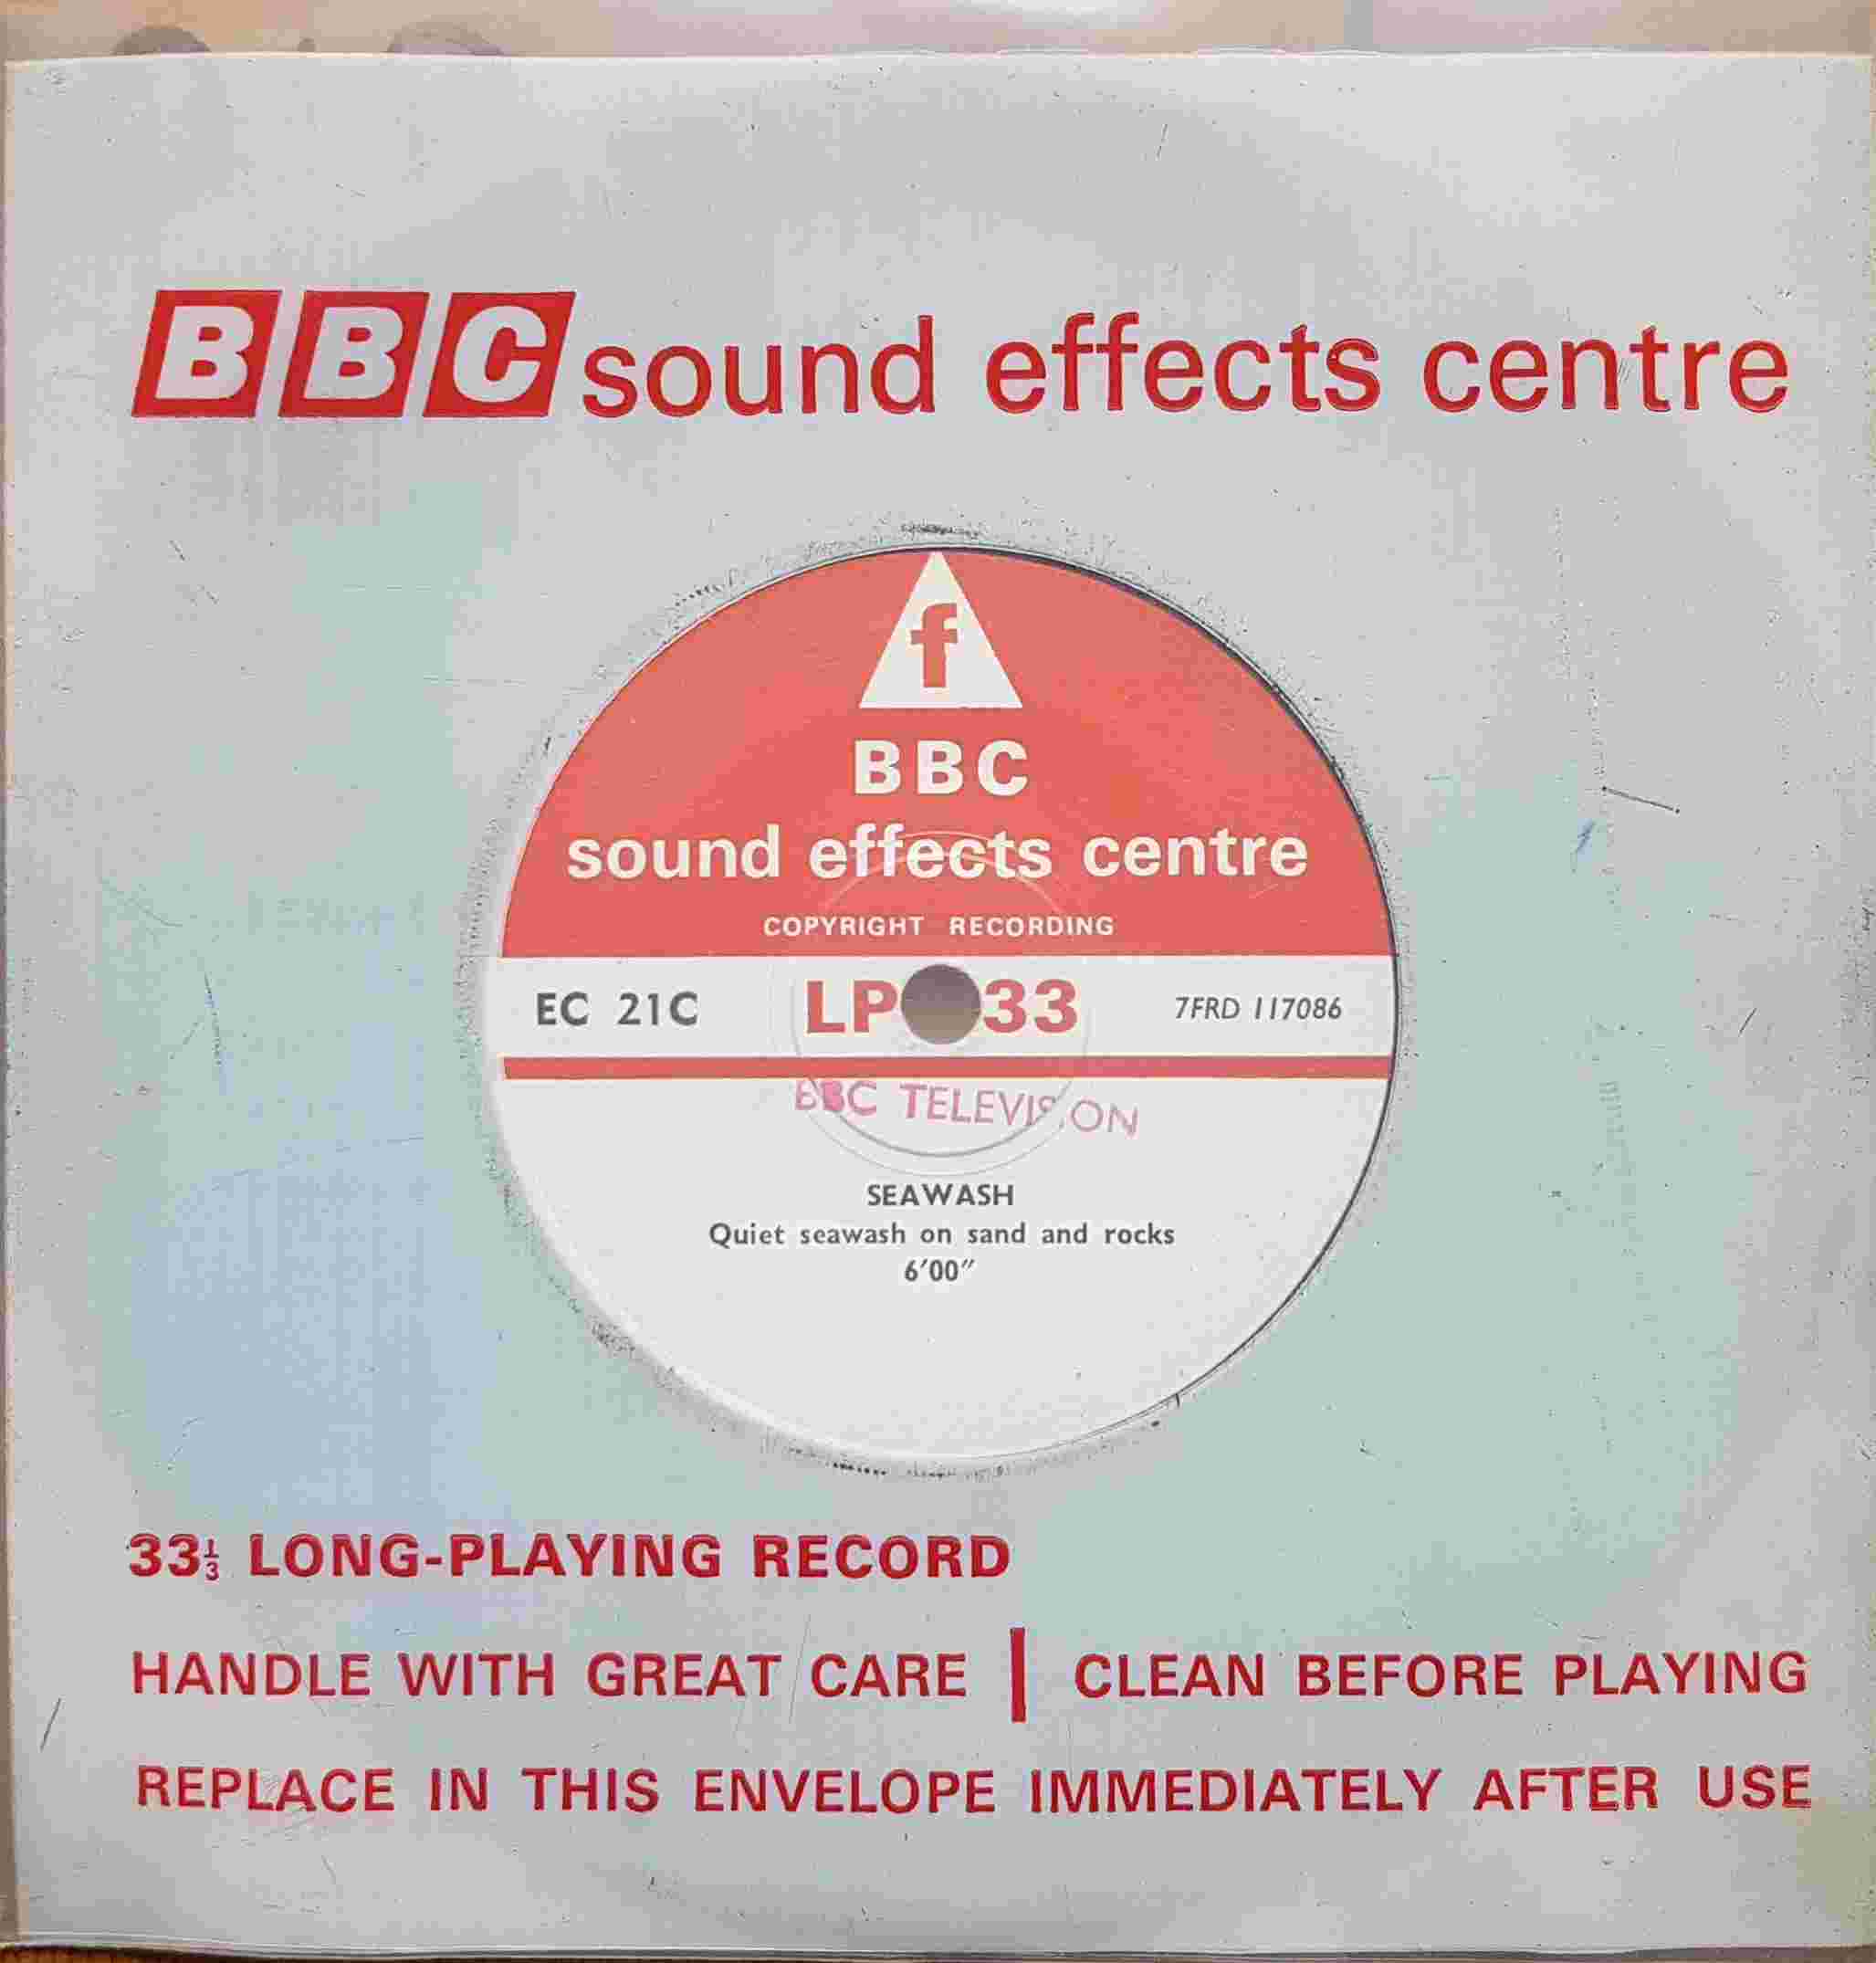 Picture of EC 21C Seawash single by artist Not registered from the BBC records and Tapes library